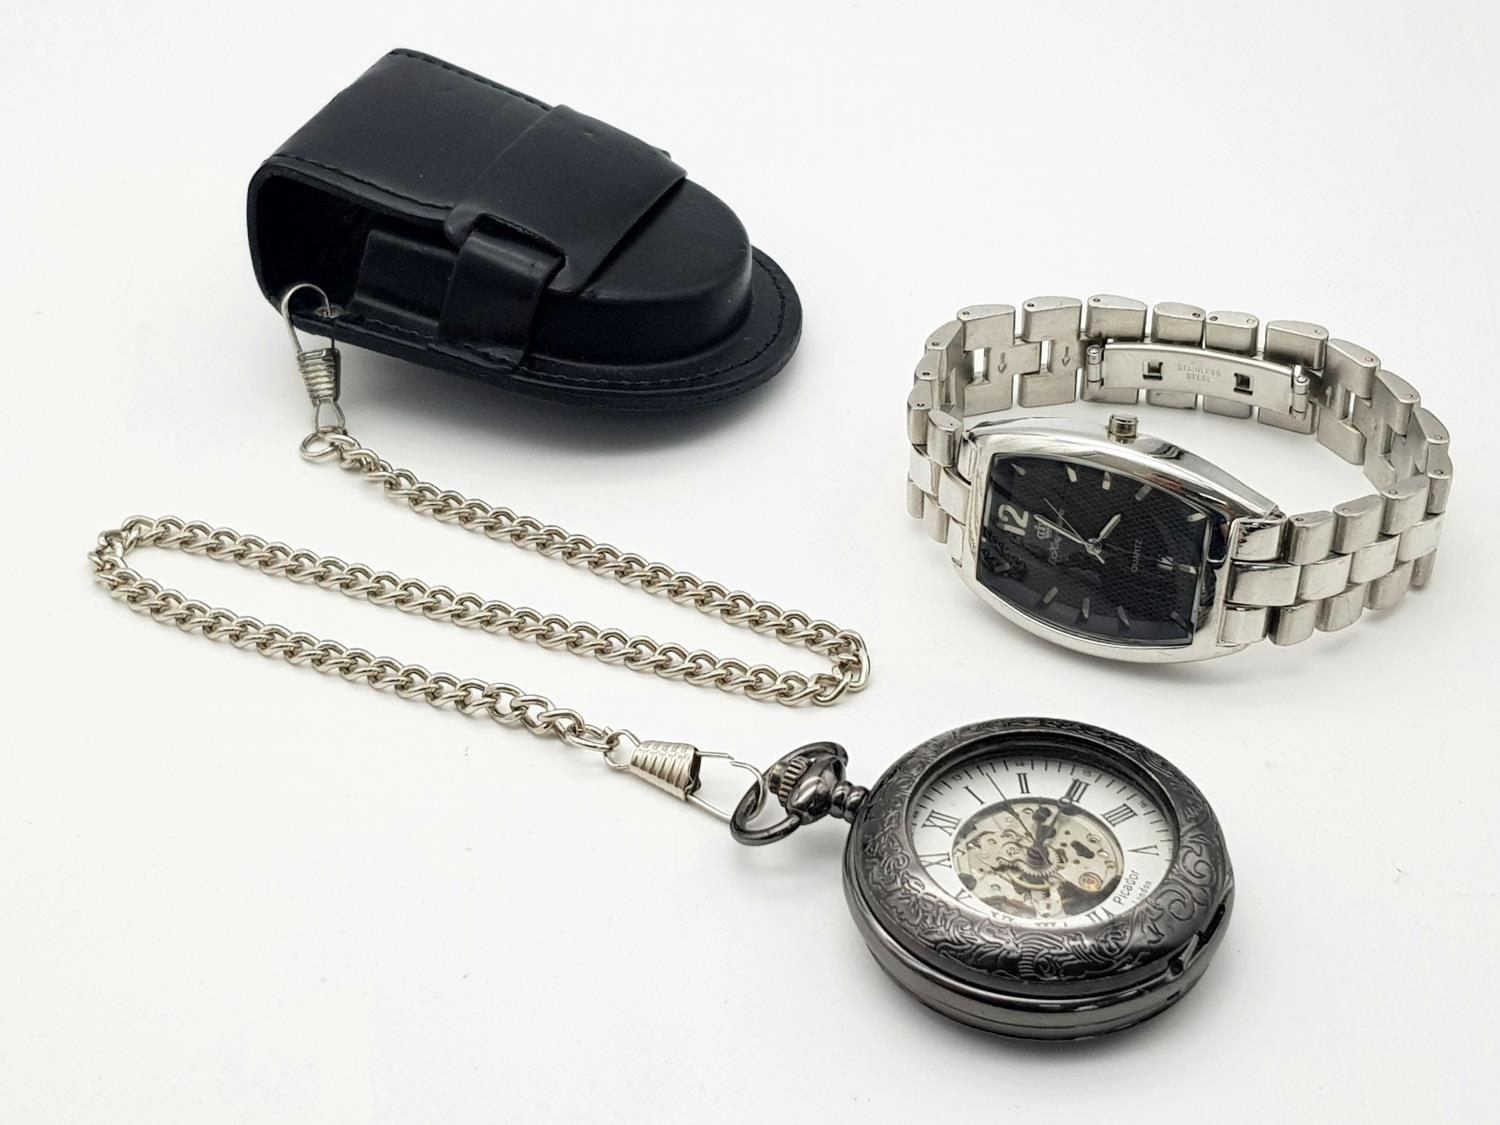 A Parcel of Two Men’s Dress Watches Comprising; 1) A Manual Wind Gun Metal Grey Pocket Watch by